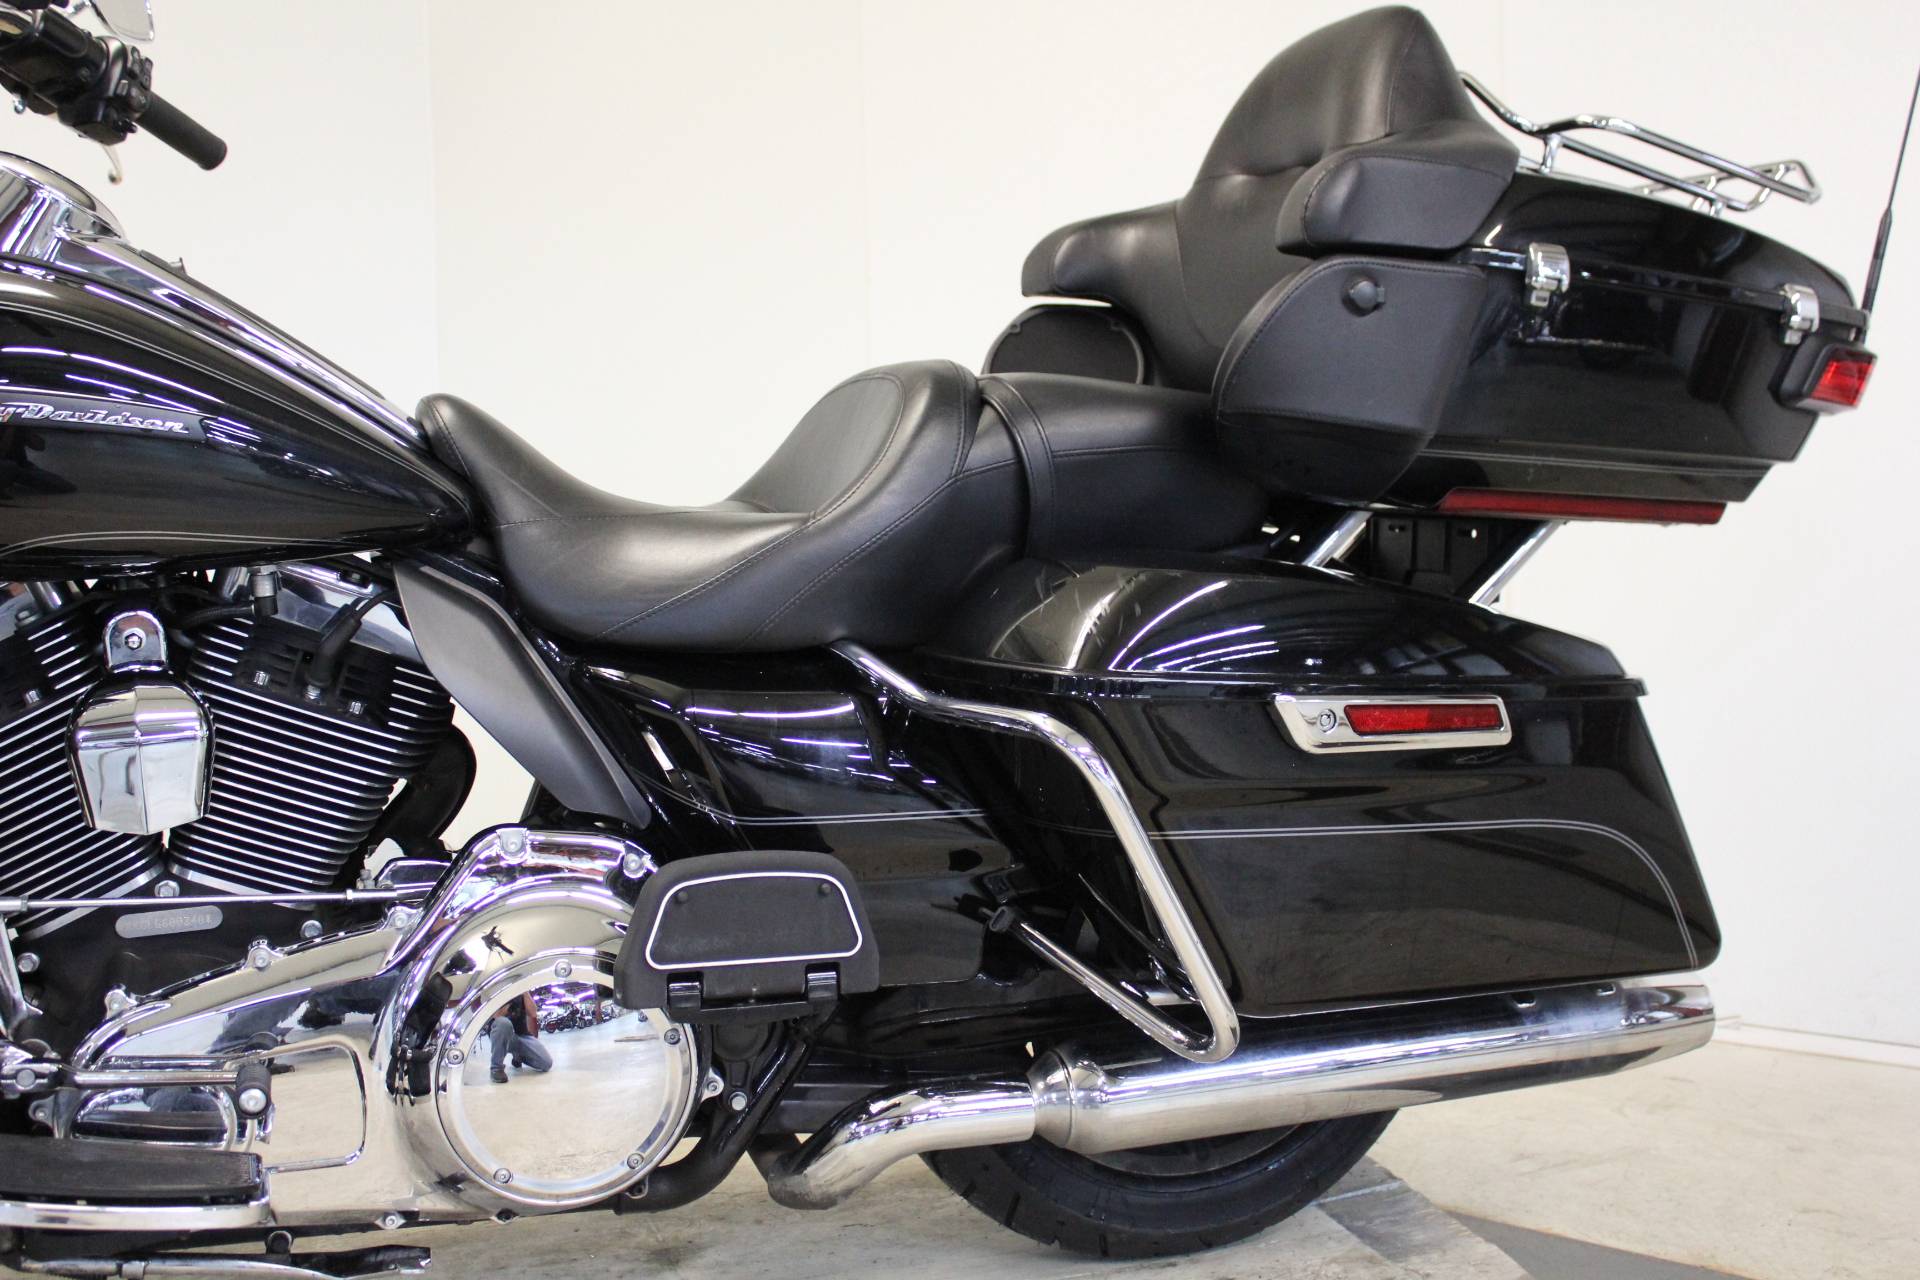 Used 2016 Harley Davidson Road Glide Ultra Motorcycles In Adams Ma Stock Number 600340